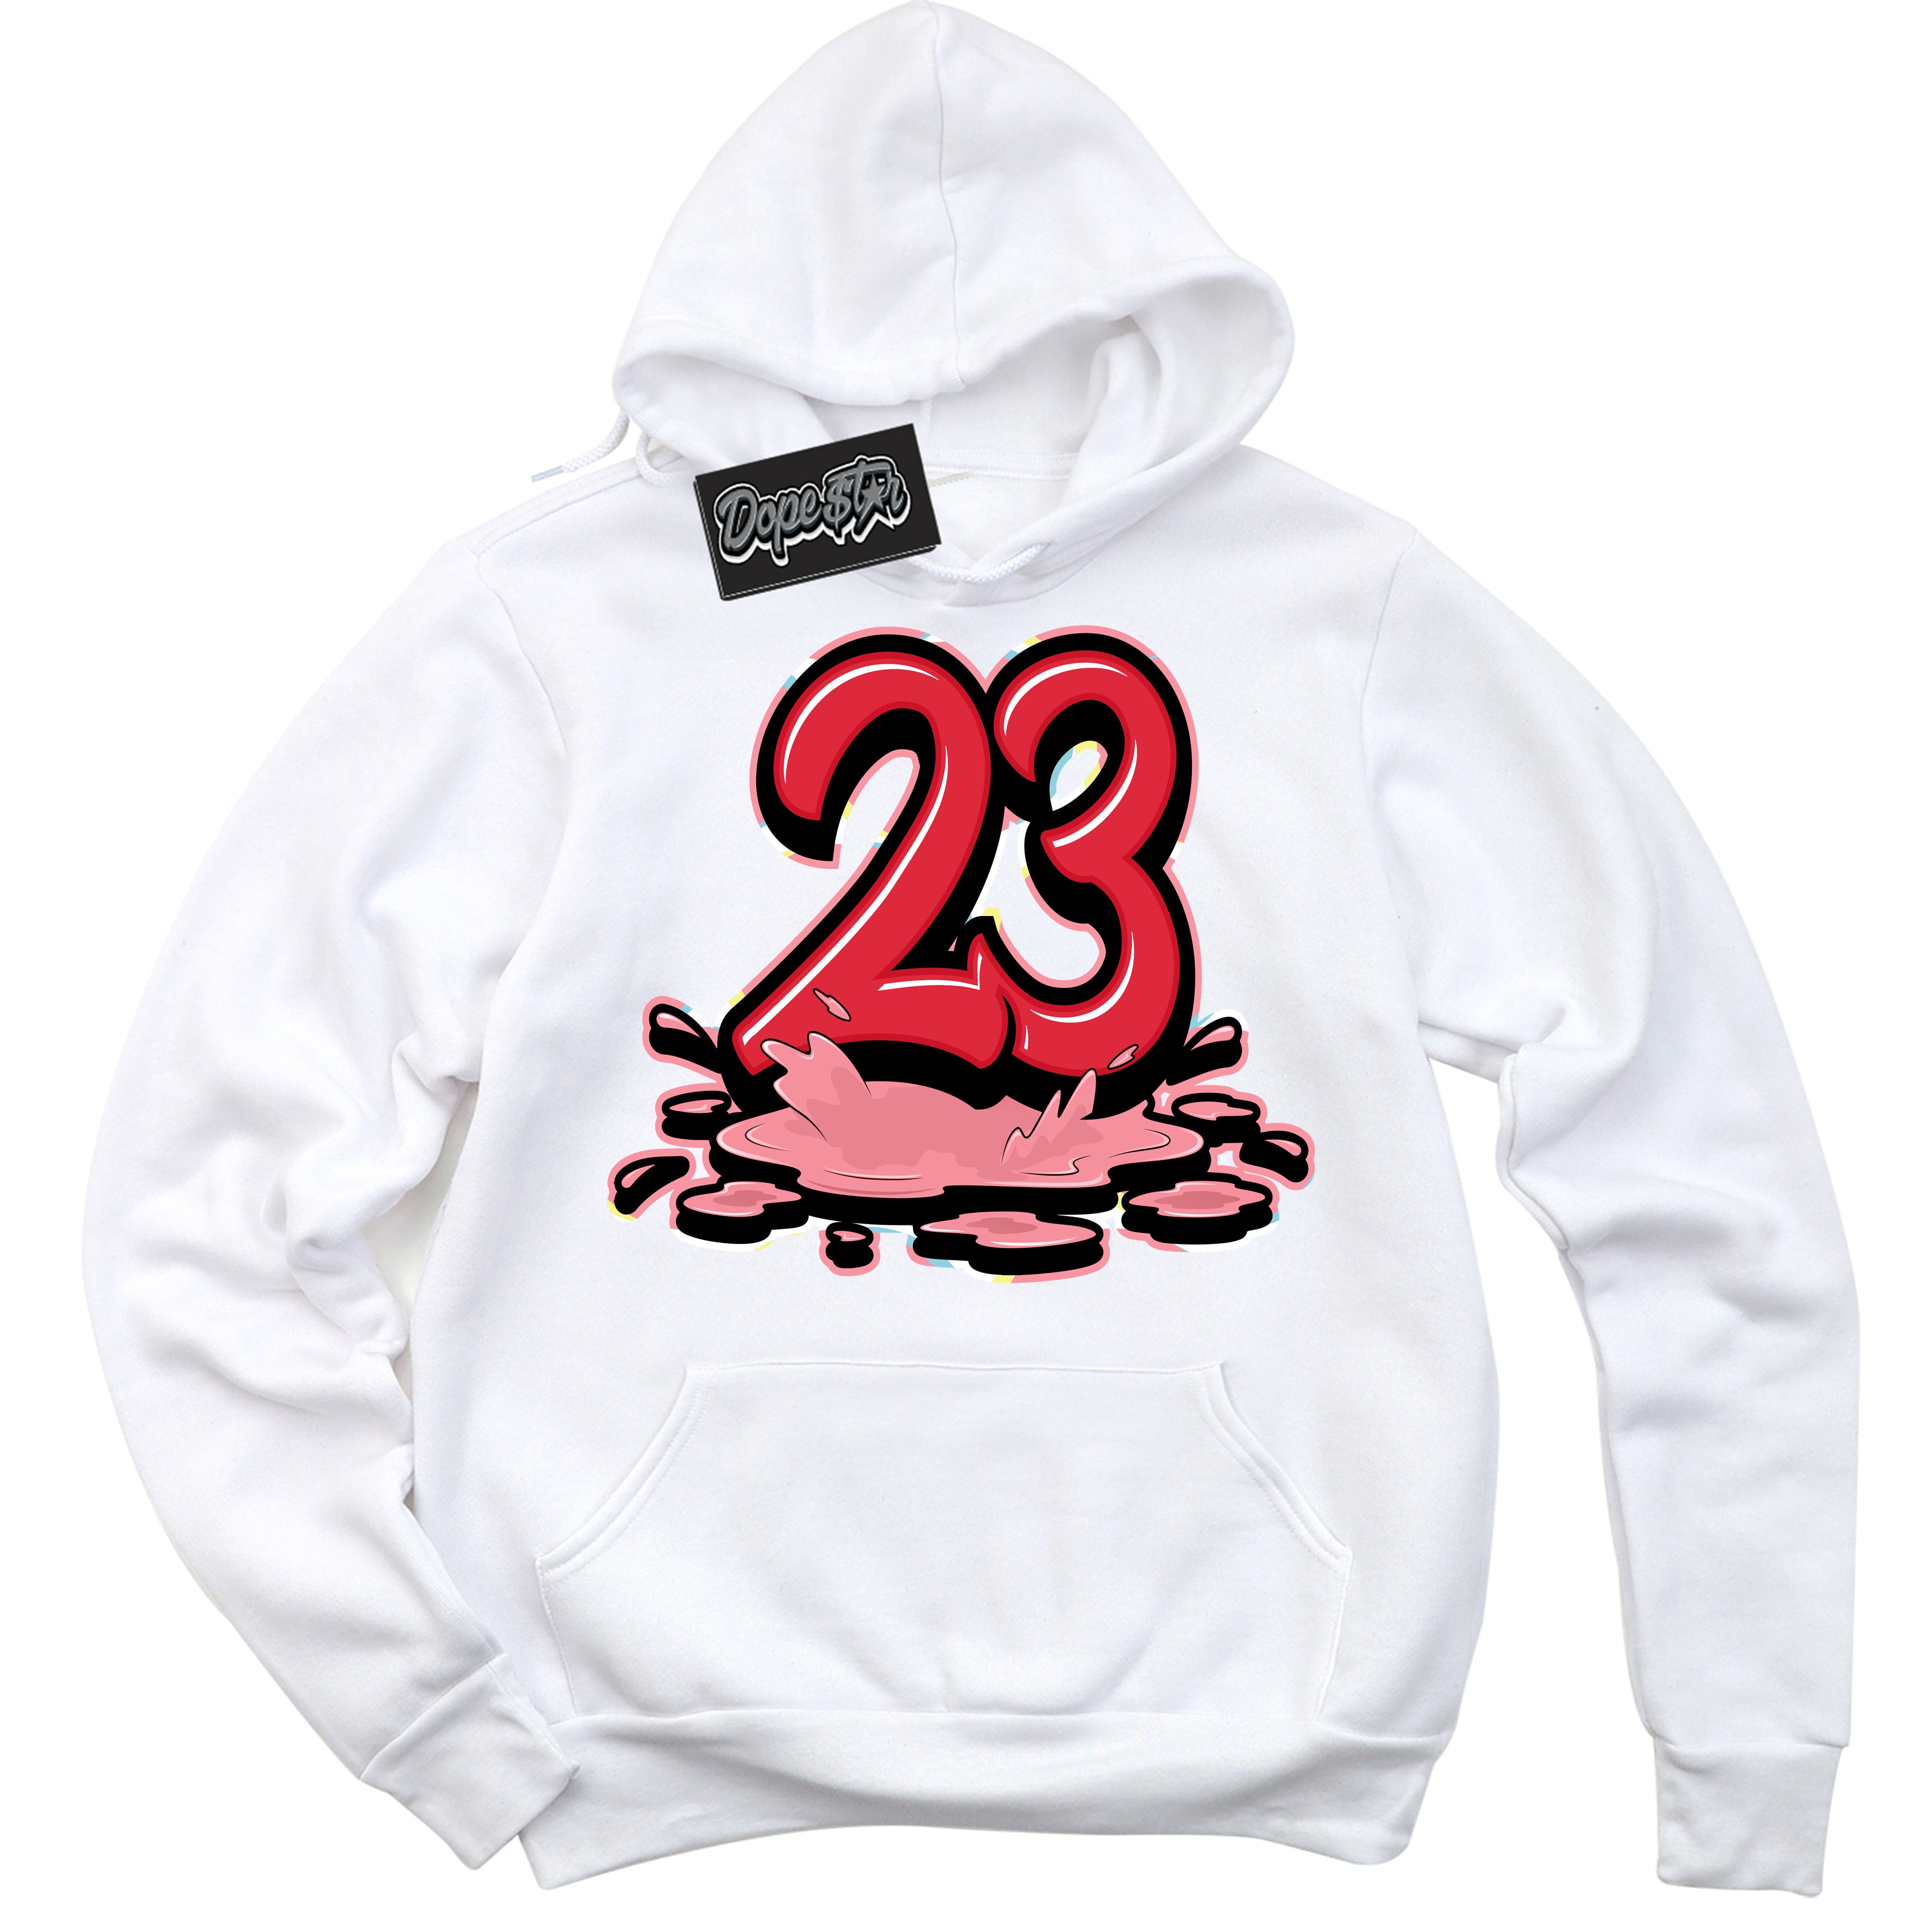 Cool White Graphic DopeStar Hoodie with “ 23 Melting “ print, that perfectly matches Spider-Verse 1s sneakers